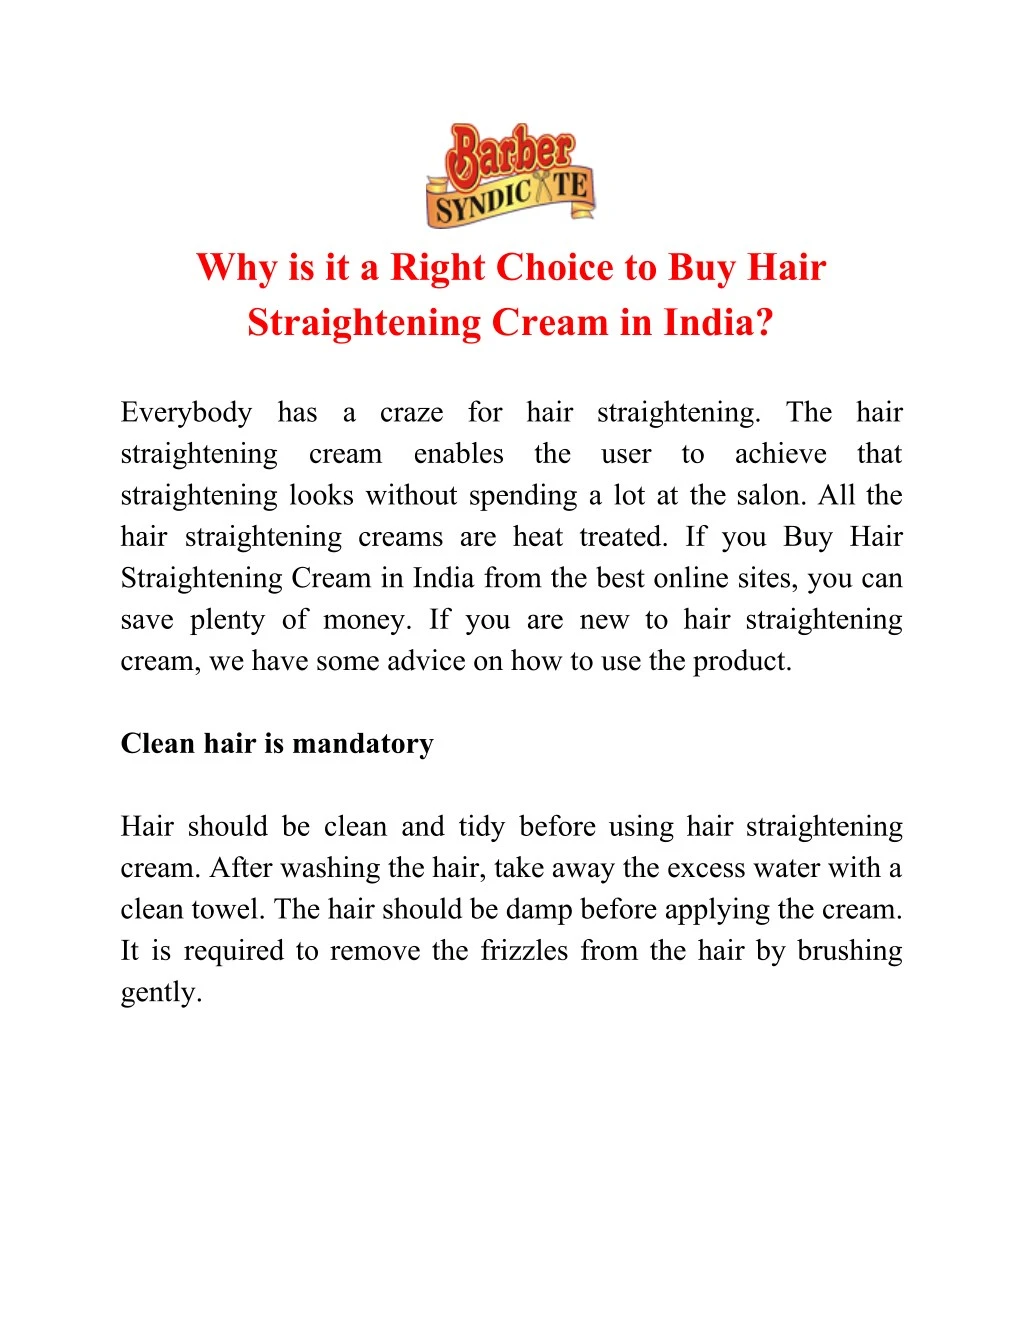 why is it a right choice to buy hair